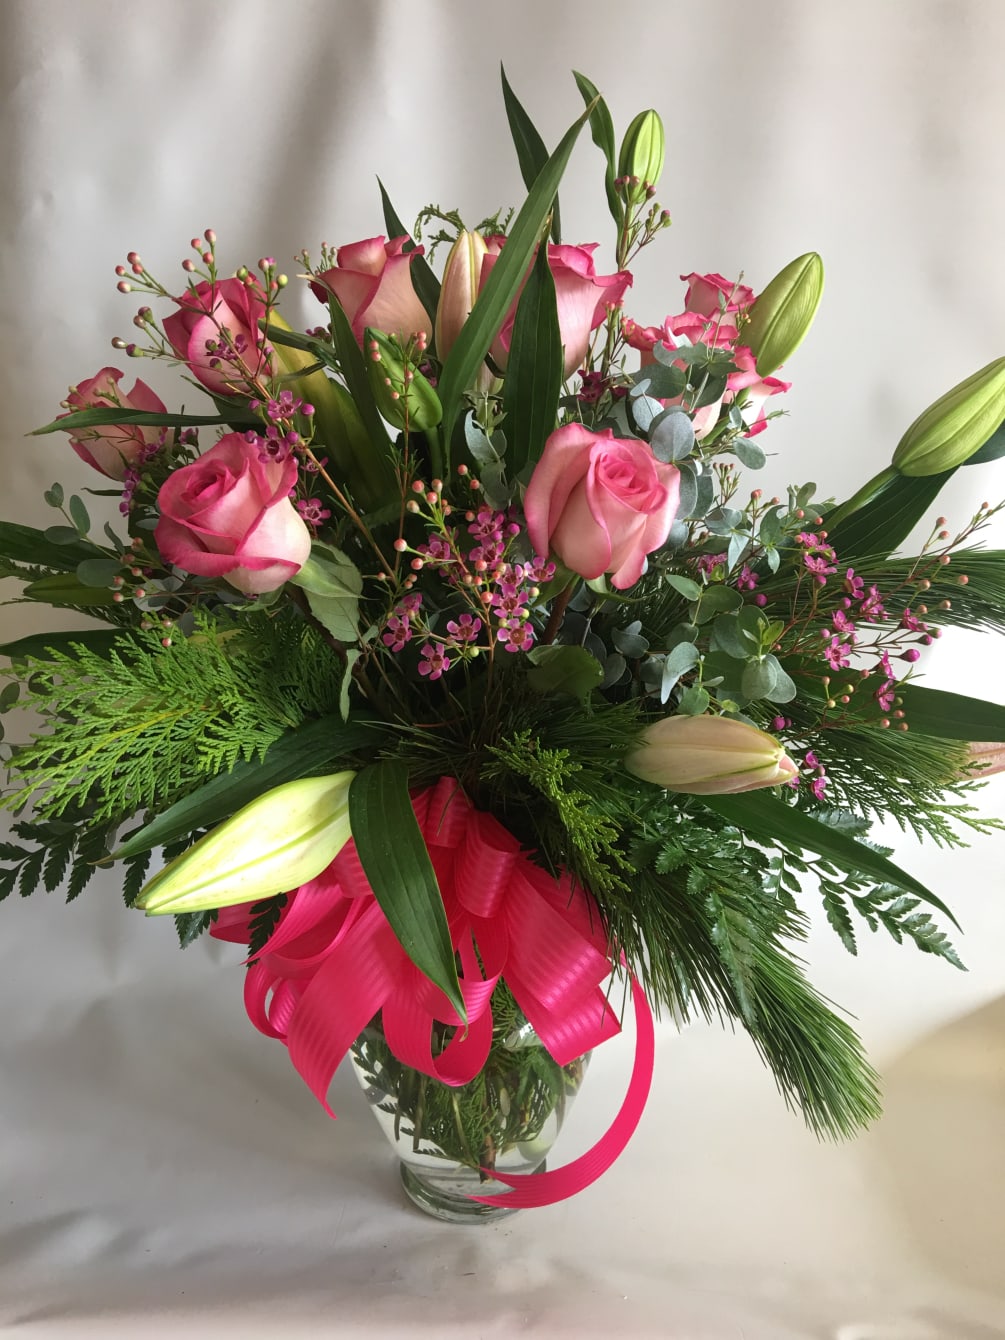 Beautiful pink roses with stargazer lilies... Add in some winter greens such